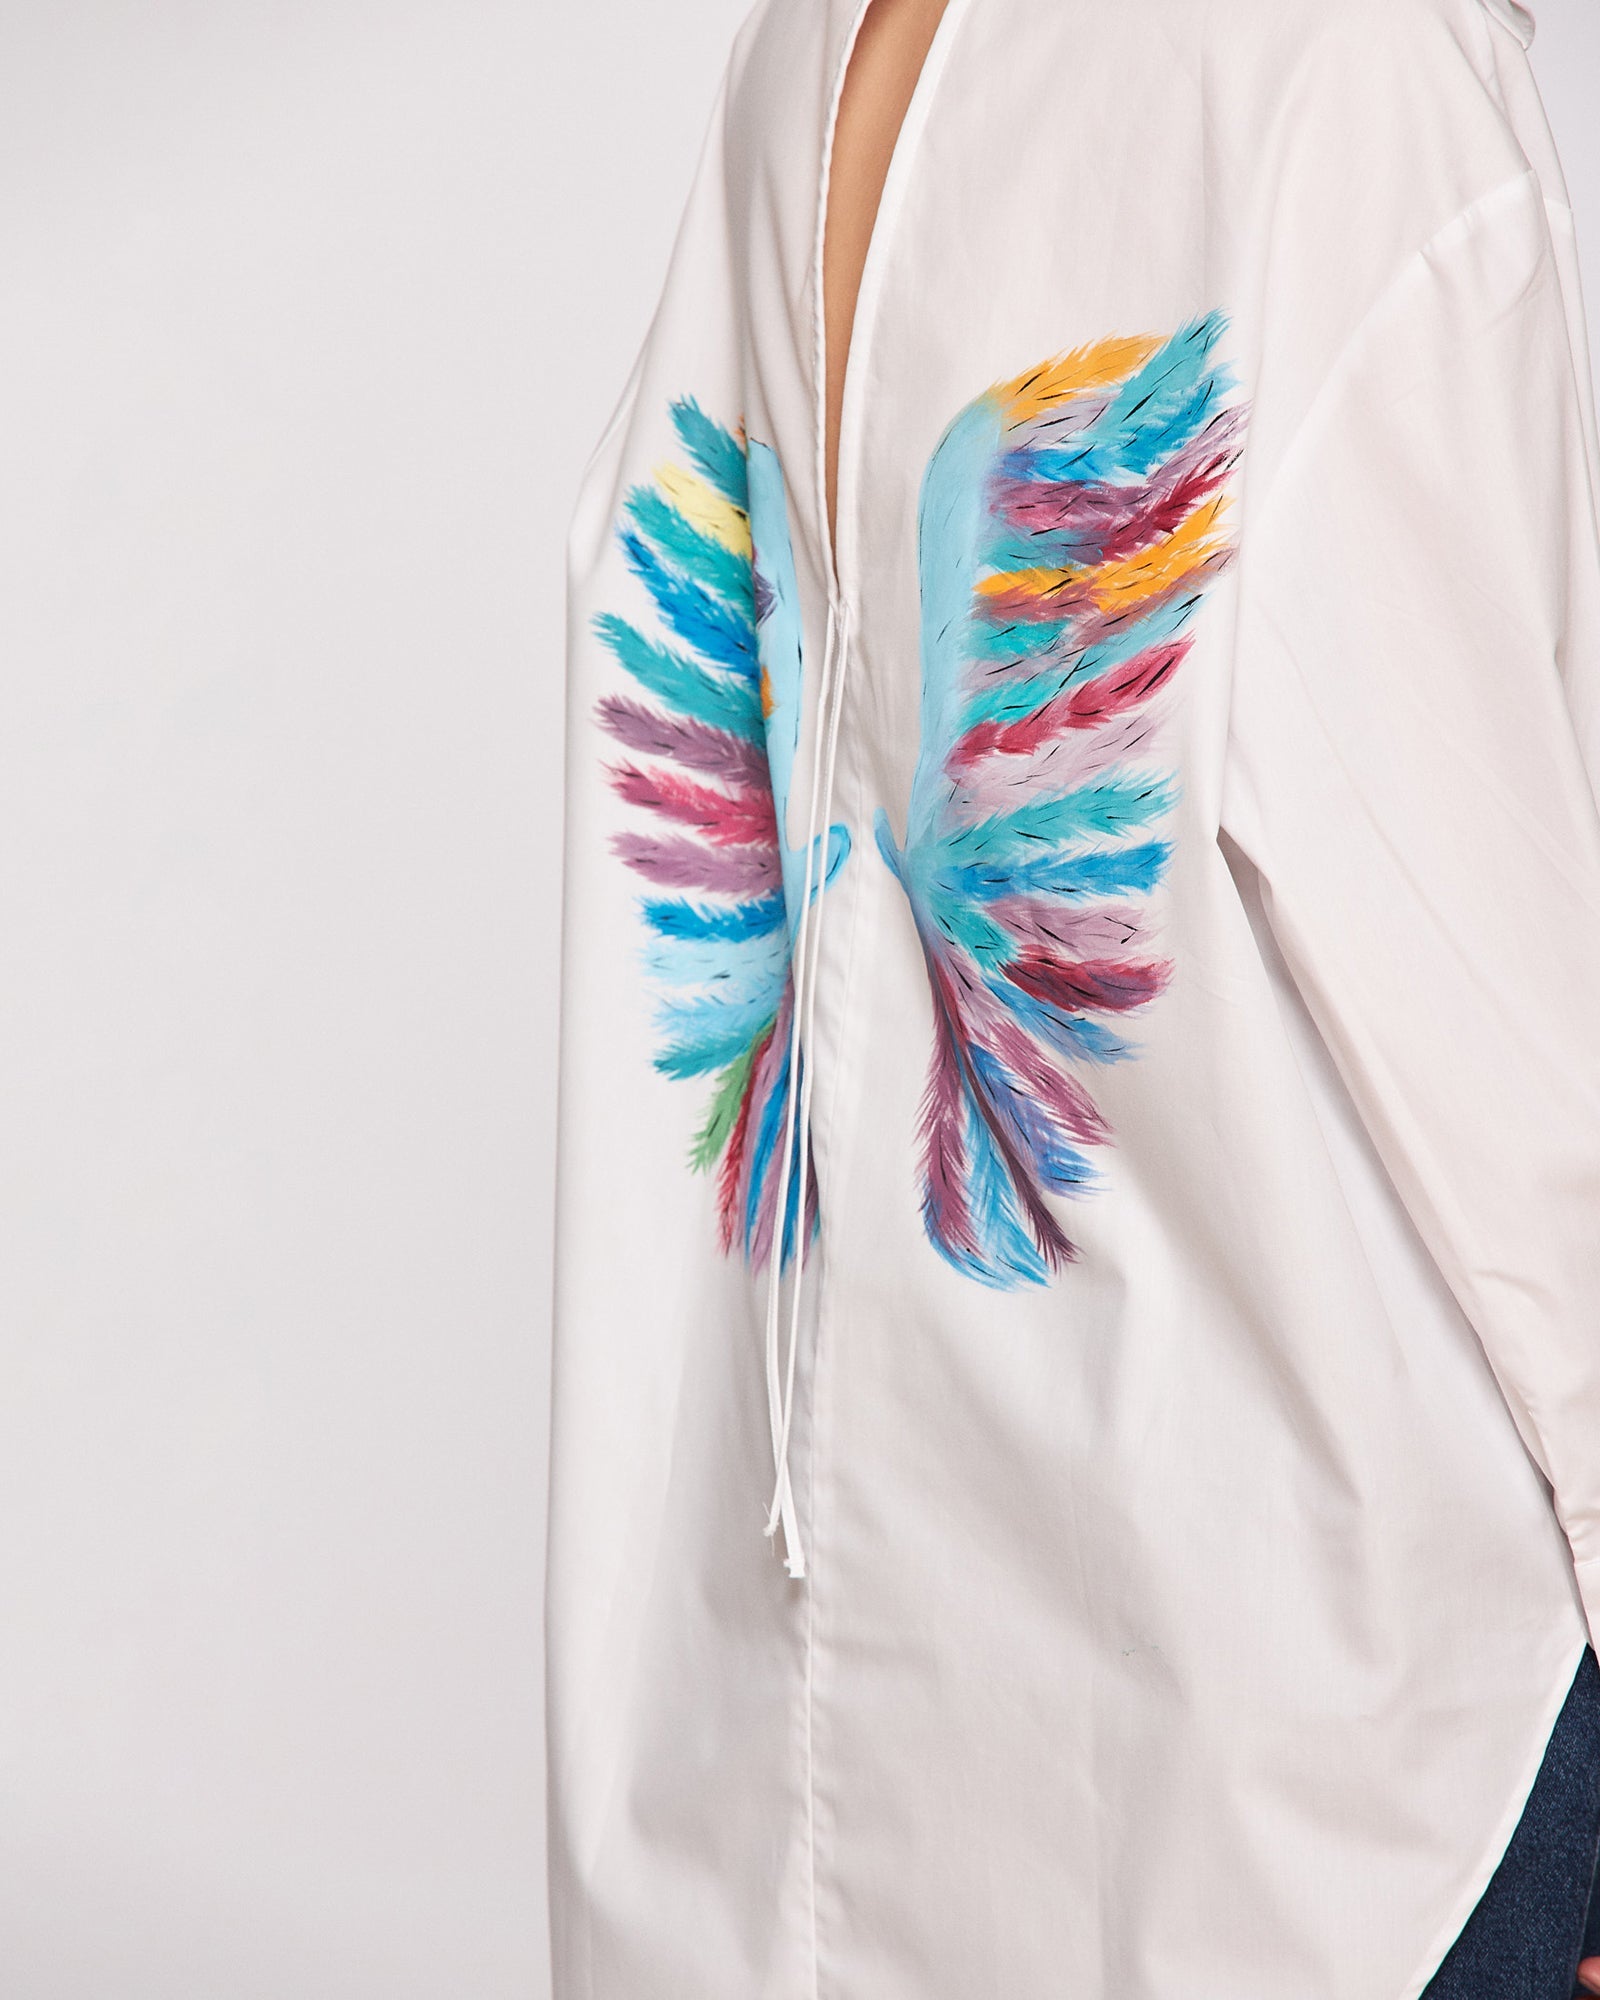 Open back shirt "Angel wings in colors"